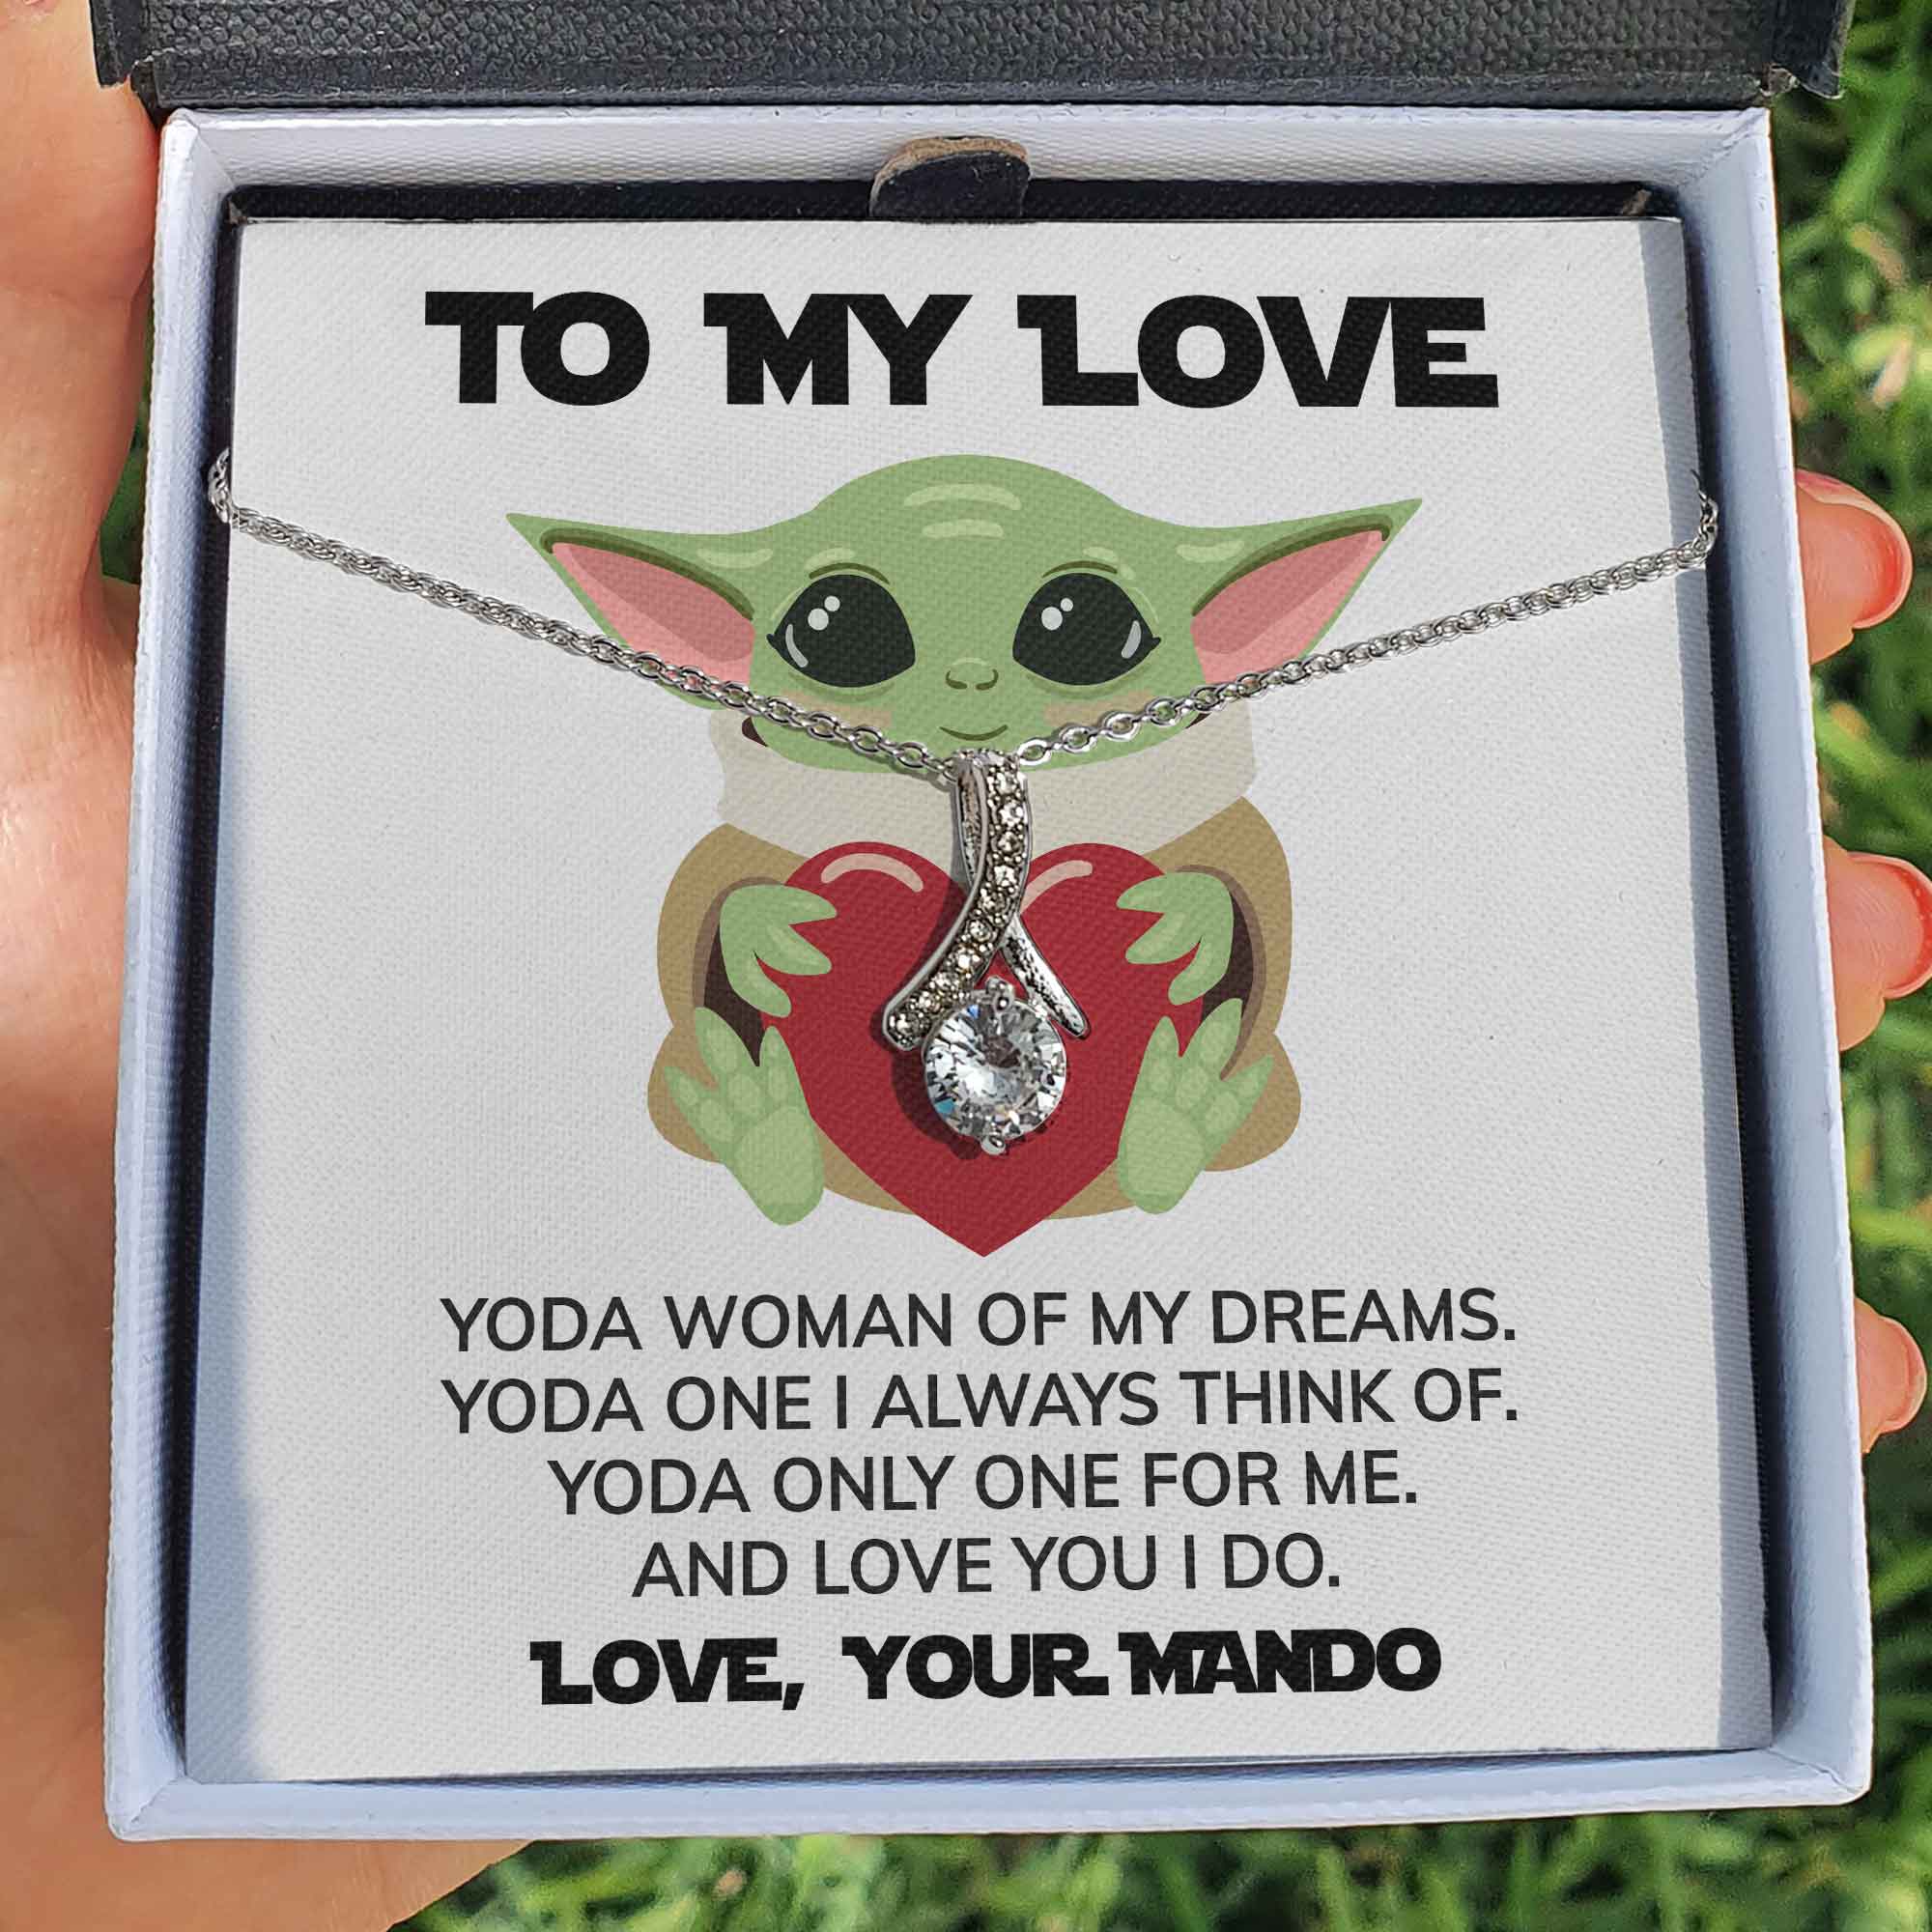 ShineOn Fulfillment Jewelry 14K White Gold Finish / Two-Toned Box To My Love - Yoda Woman Of My Dreams - Necklace